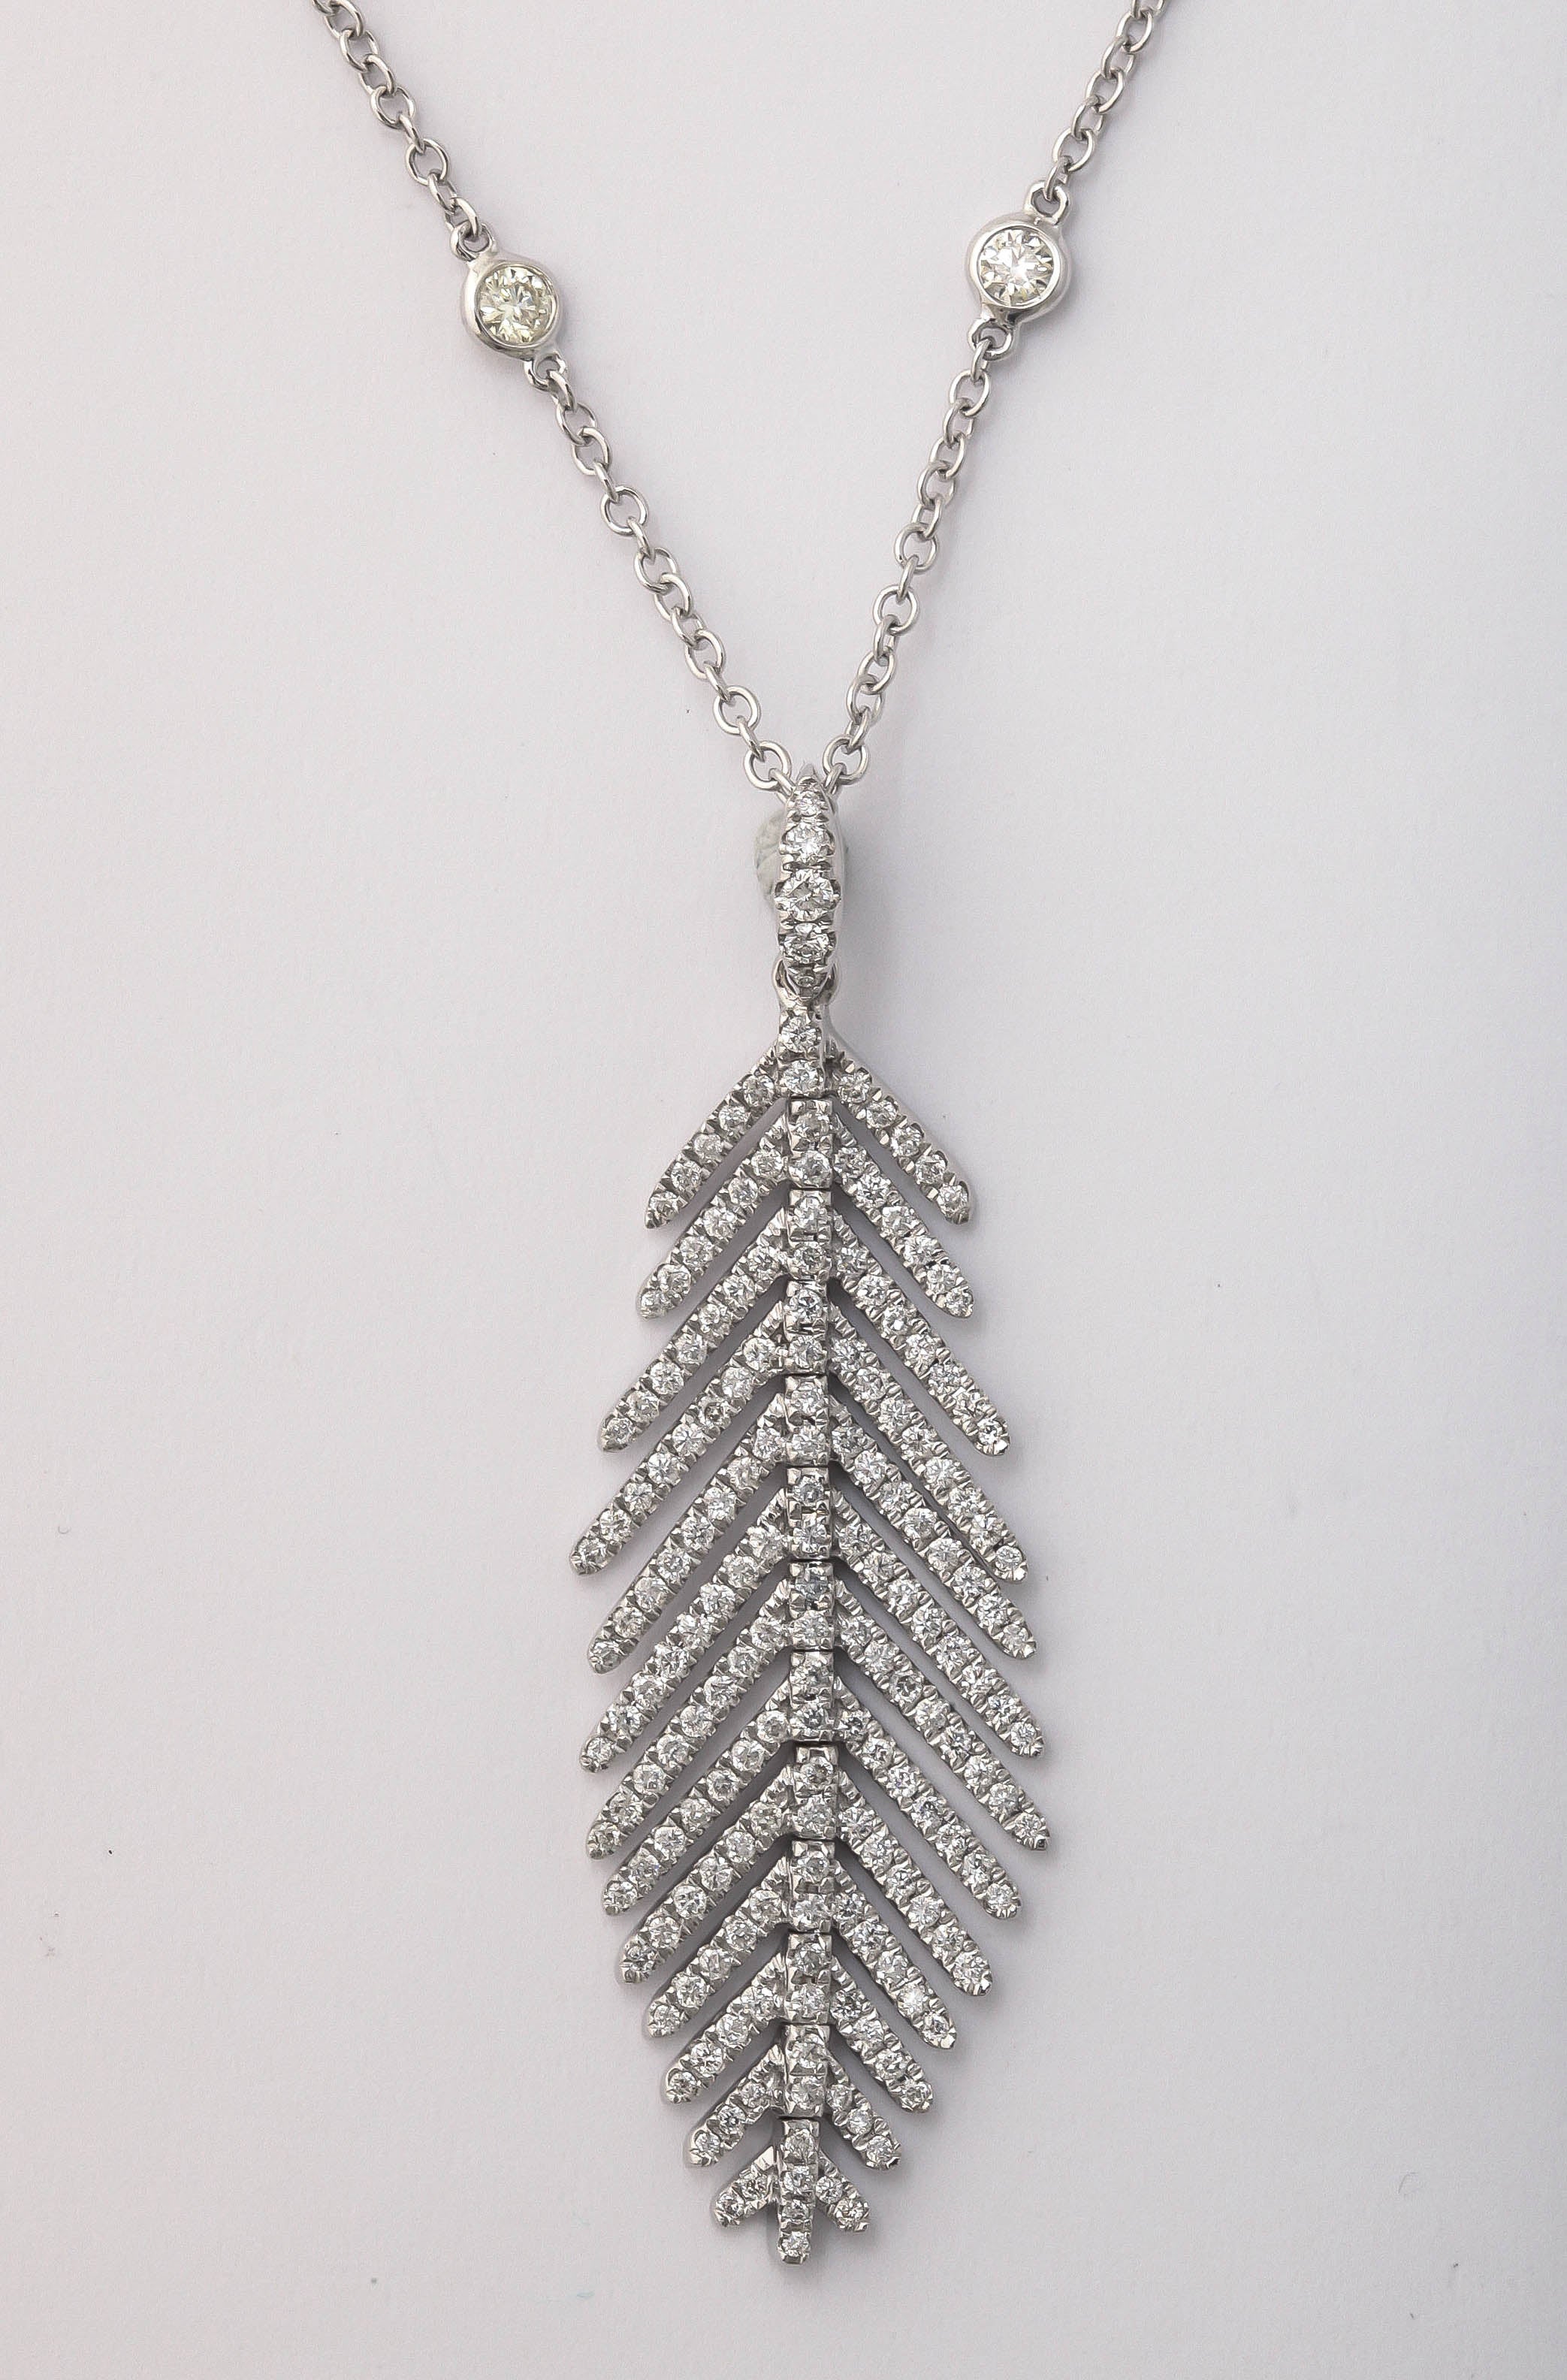 flexible feather pendant
2 inches long
1/2 inch wide
194 diamonds 1.00 carat
suspended from 18k white gold and diamond chain
16 diamonds 0.75 carats
18